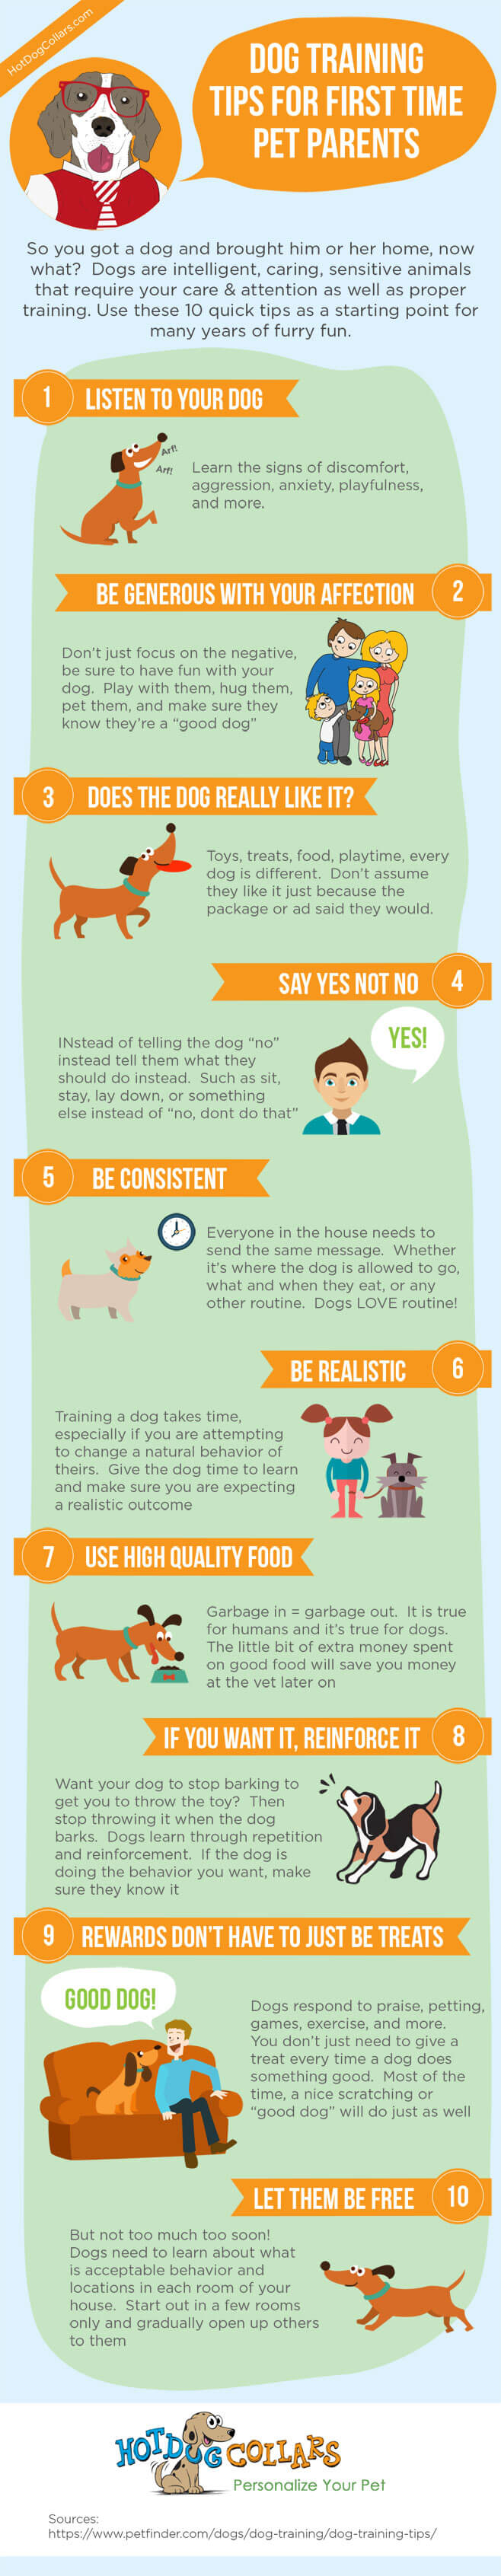 Just got a dog? need some help? Here are some quick tips to get you and your new family member off on the right paw